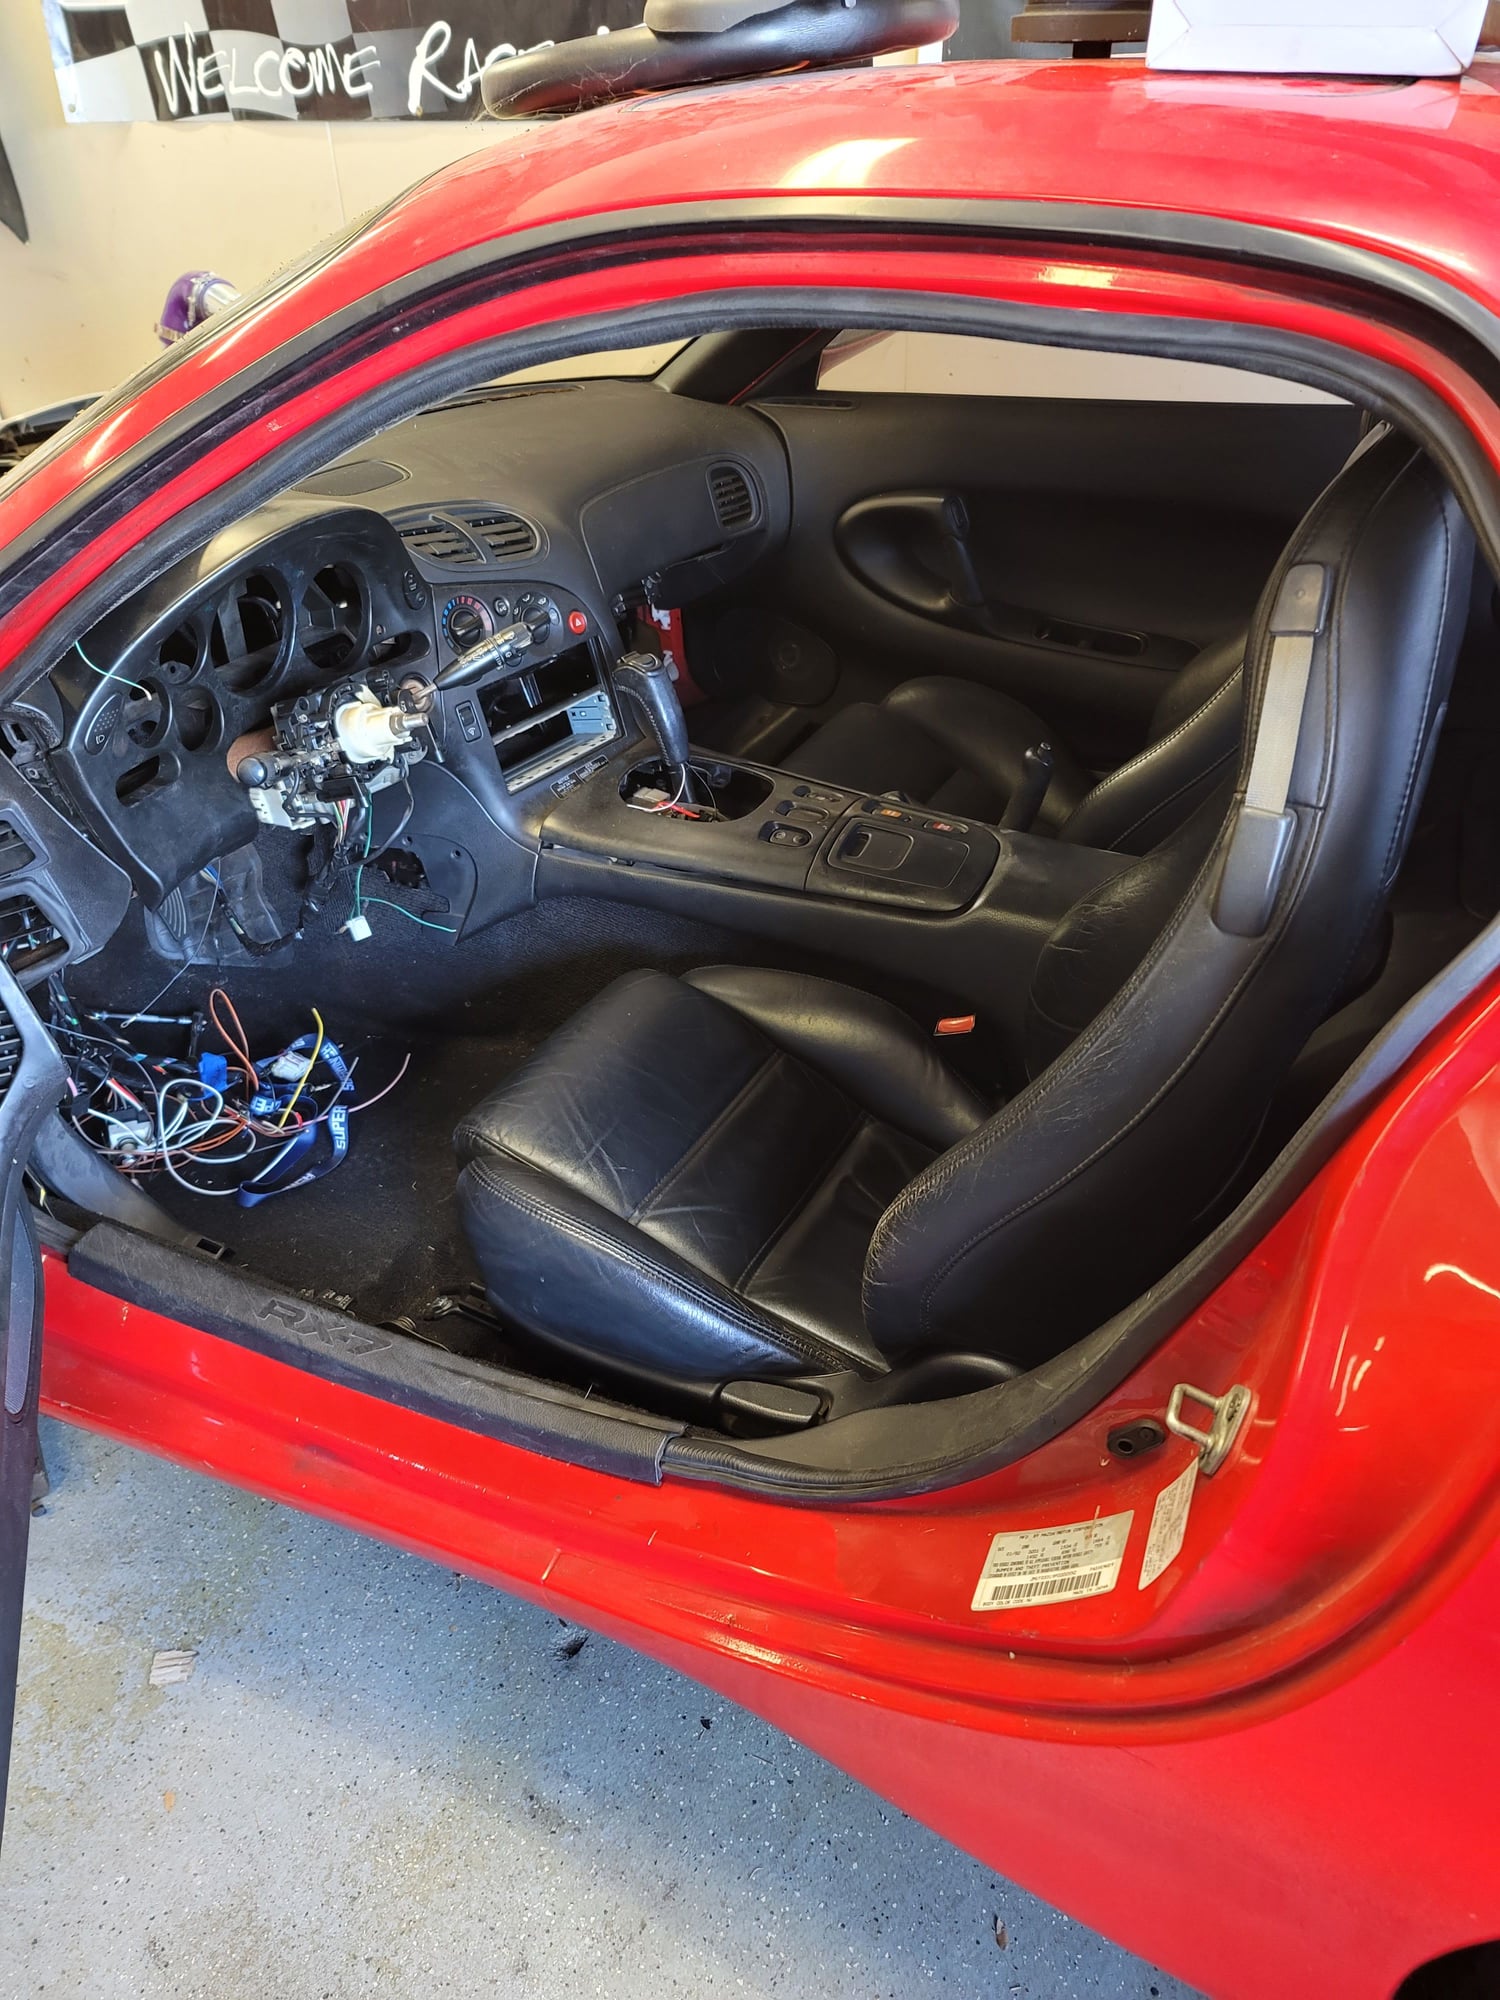 1993 Mazda RX-7 - red 1993 roller with black interior w hinson ls1 subframe $12000 - Used - VIN JM1FD3319P0200552 - Other - 2WD - Manual - Coupe - Red - Omaha, NE 68164, United States